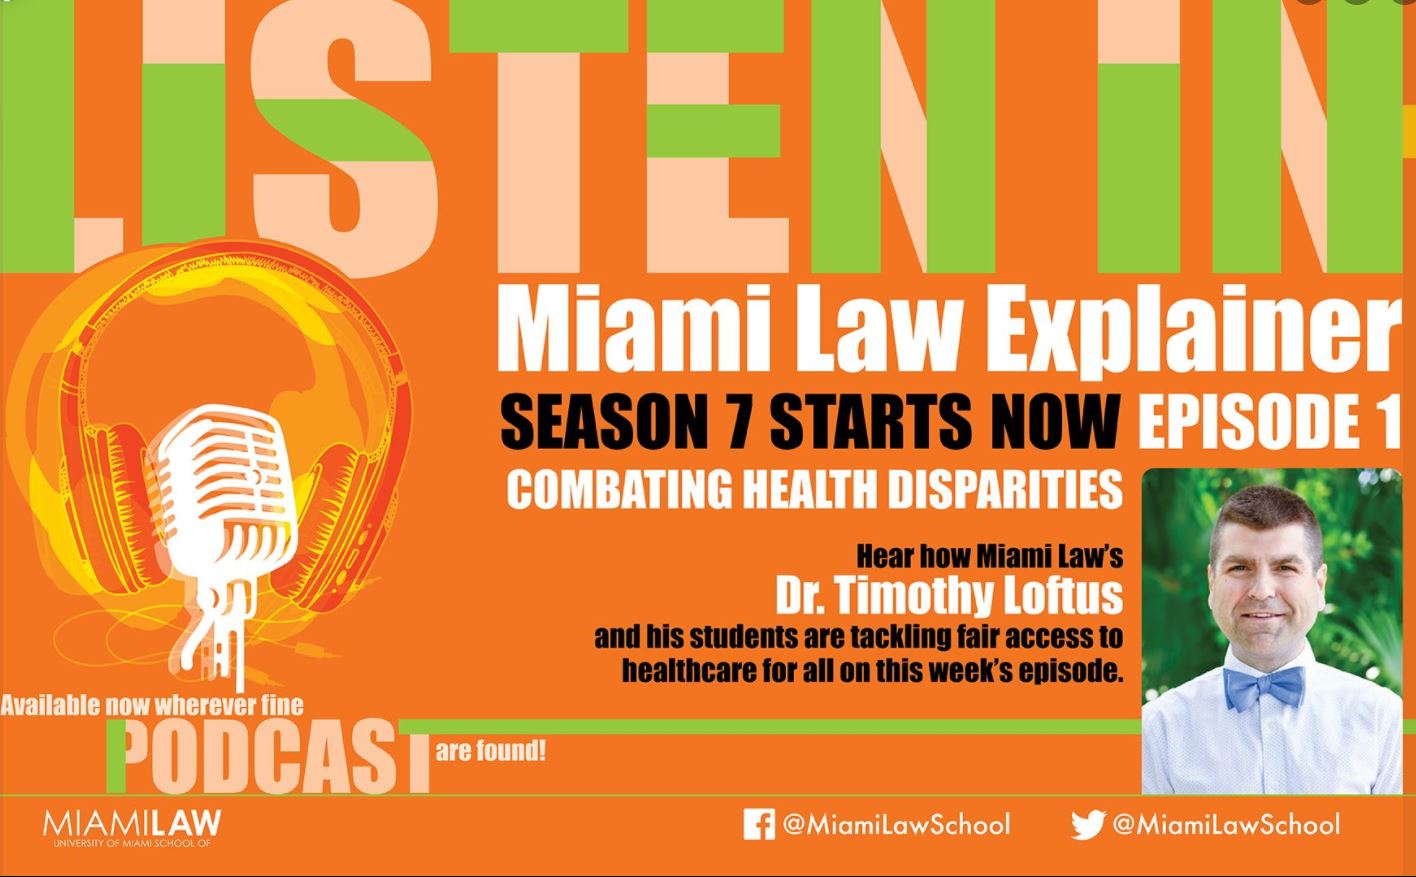 Dr. Timothy Loftus on the Miami Law Explainer podcast